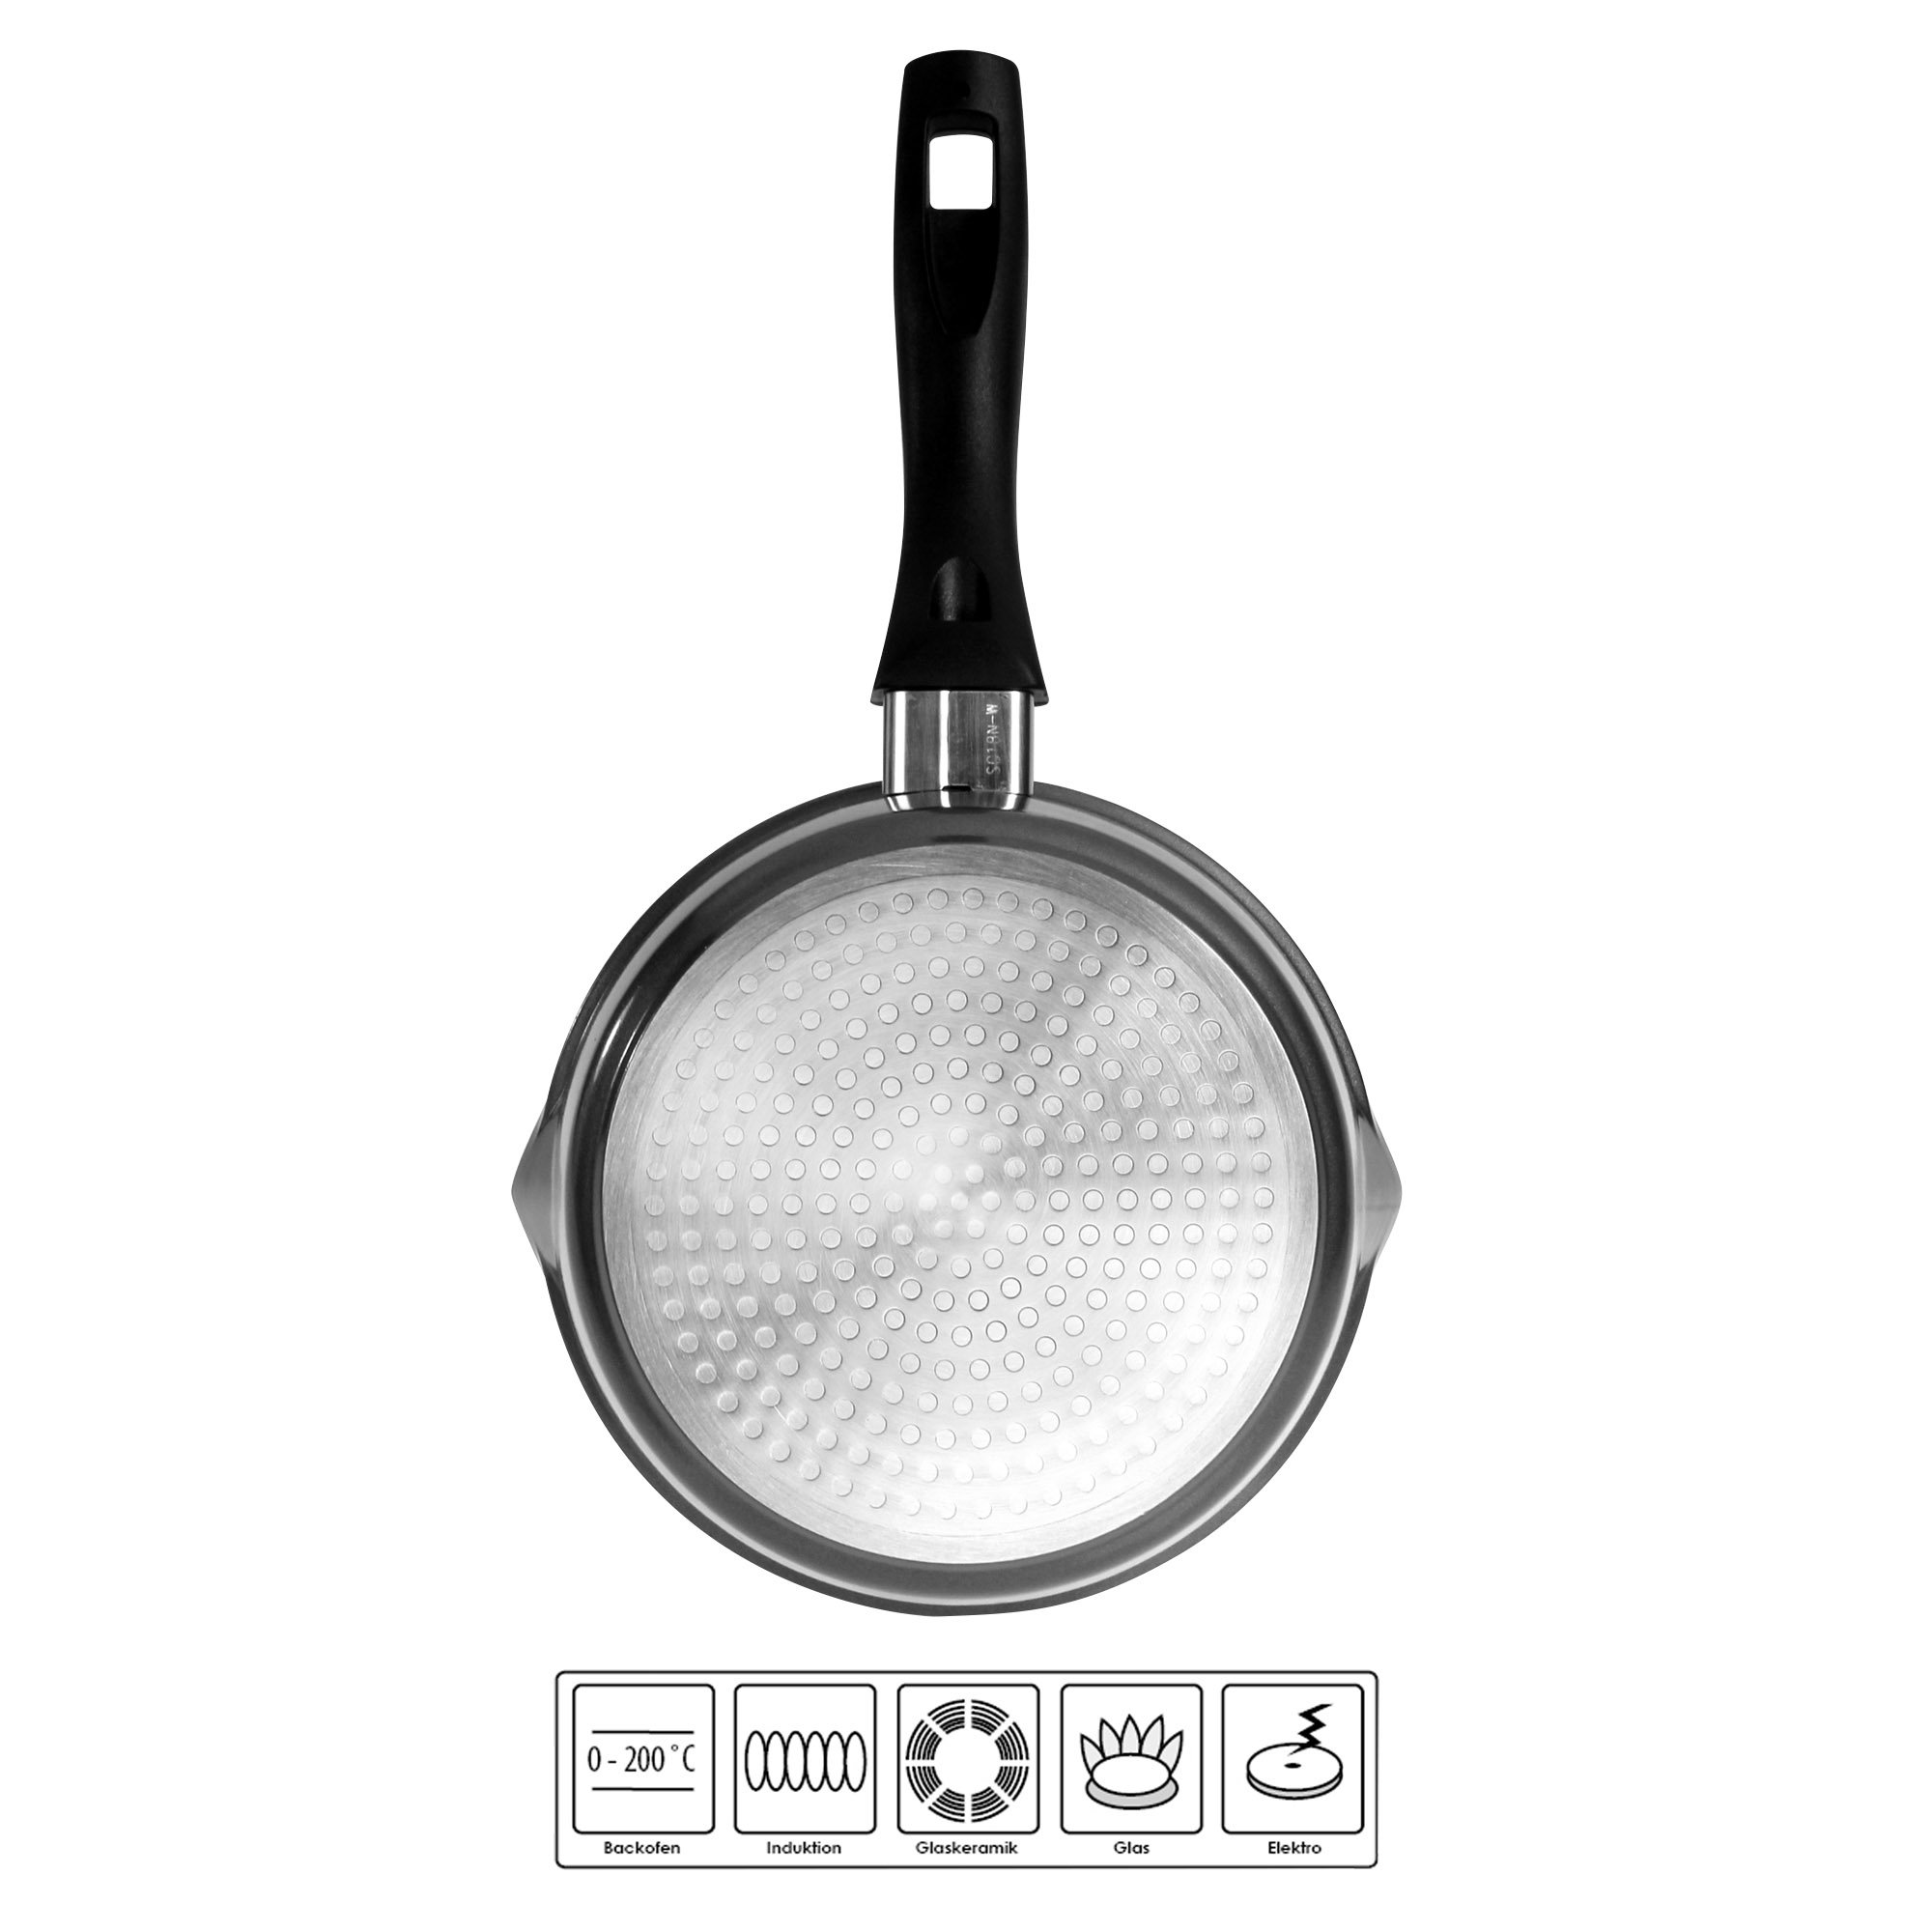 STONELINE® Saucepan 18 cm, with glass lid, non-stick coating, suitable for induction